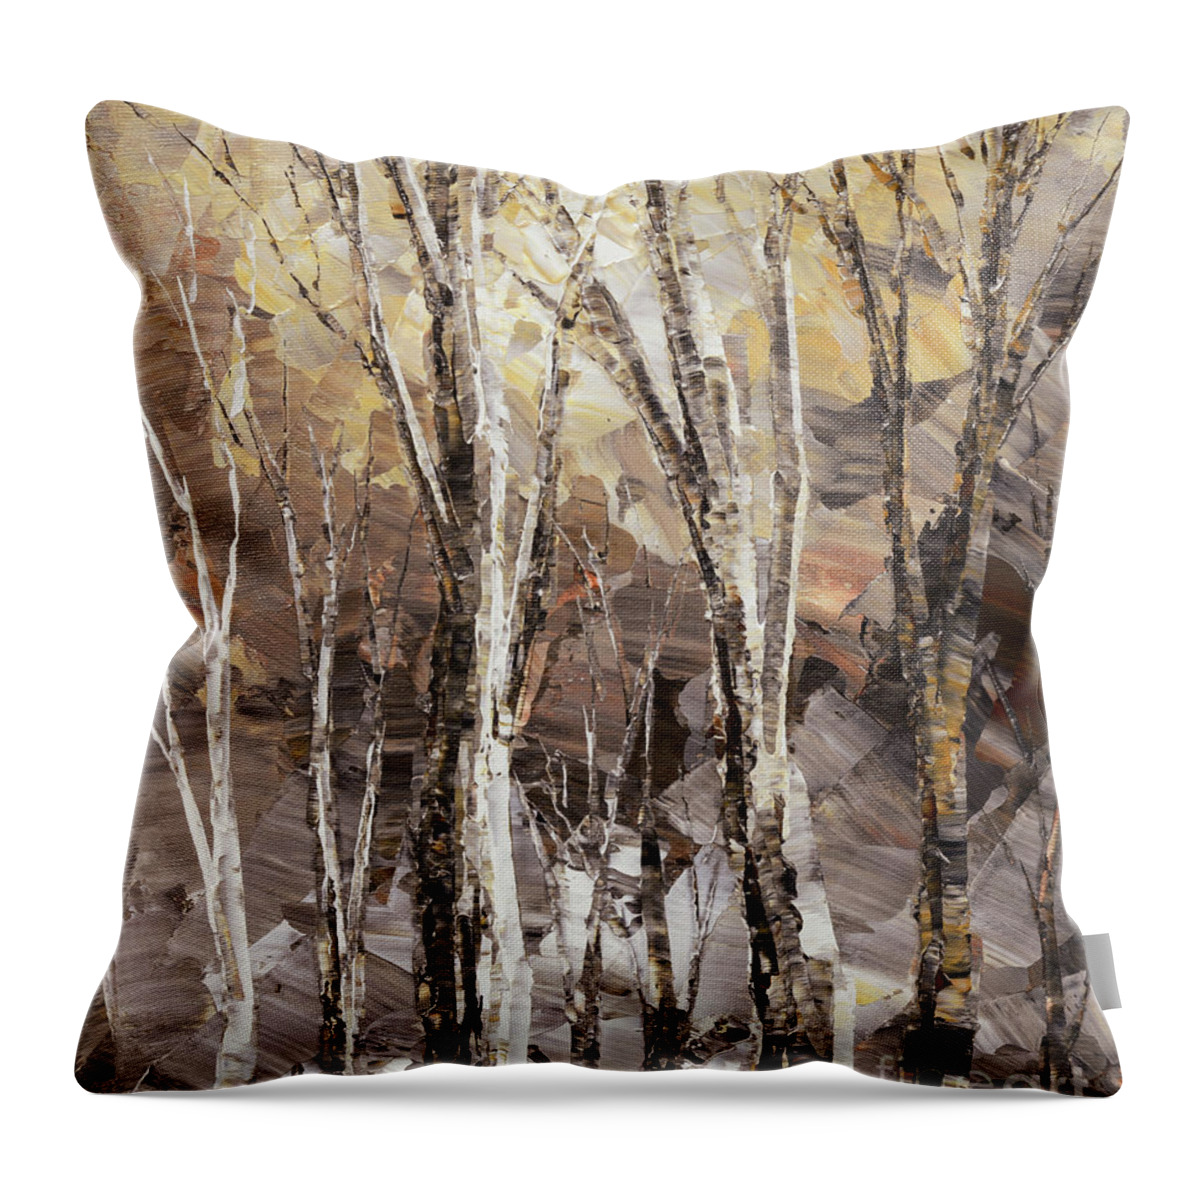 Impressionist Throw Pillow featuring the painting Beginning by Tatiana Iliina